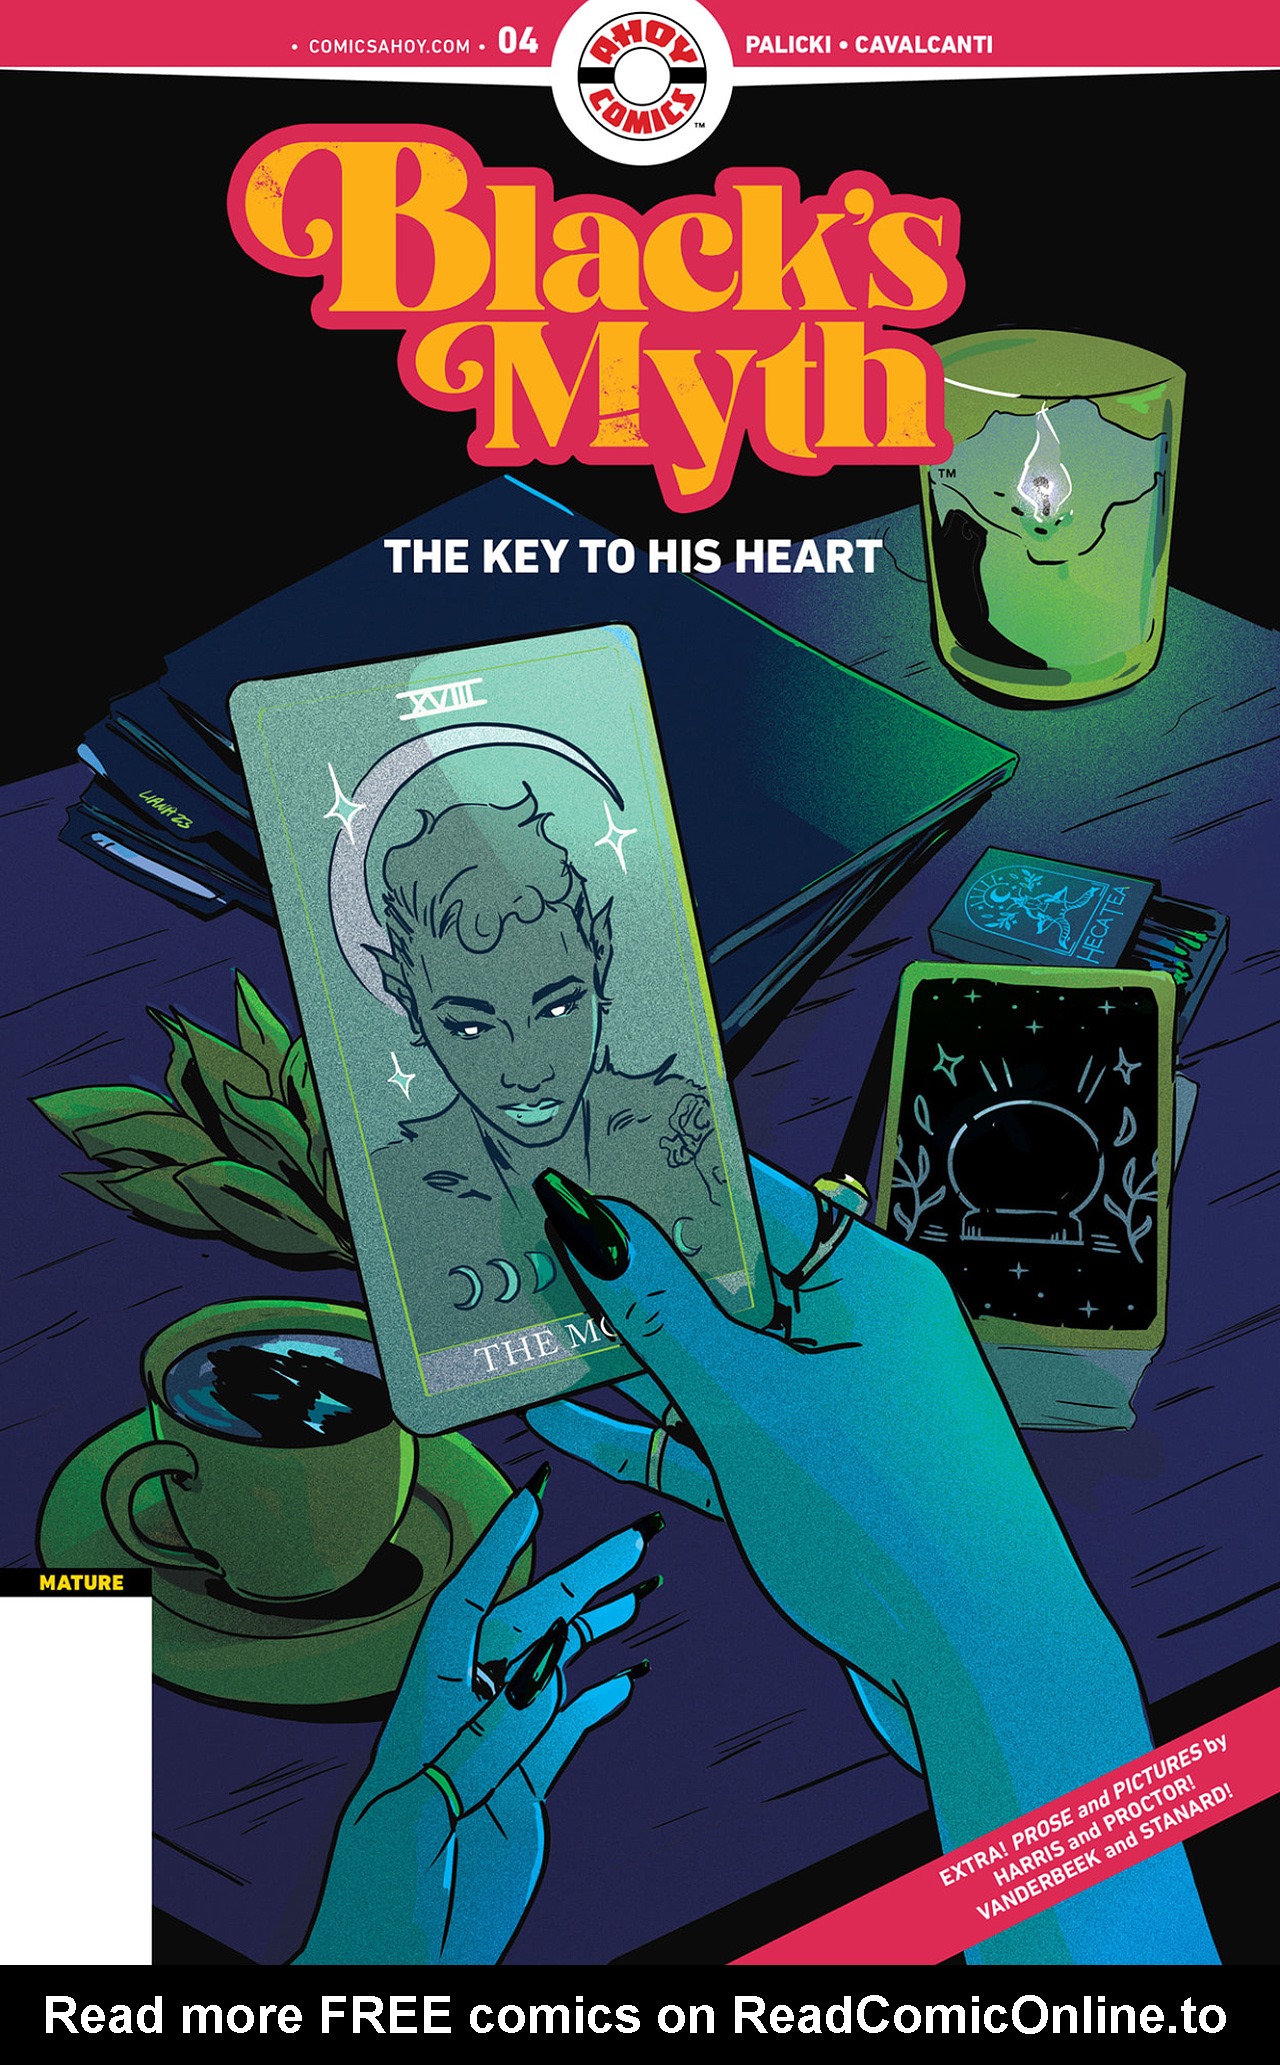 Read online Black’s Myth: The Key to His Heart comic -  Issue #4 - 1